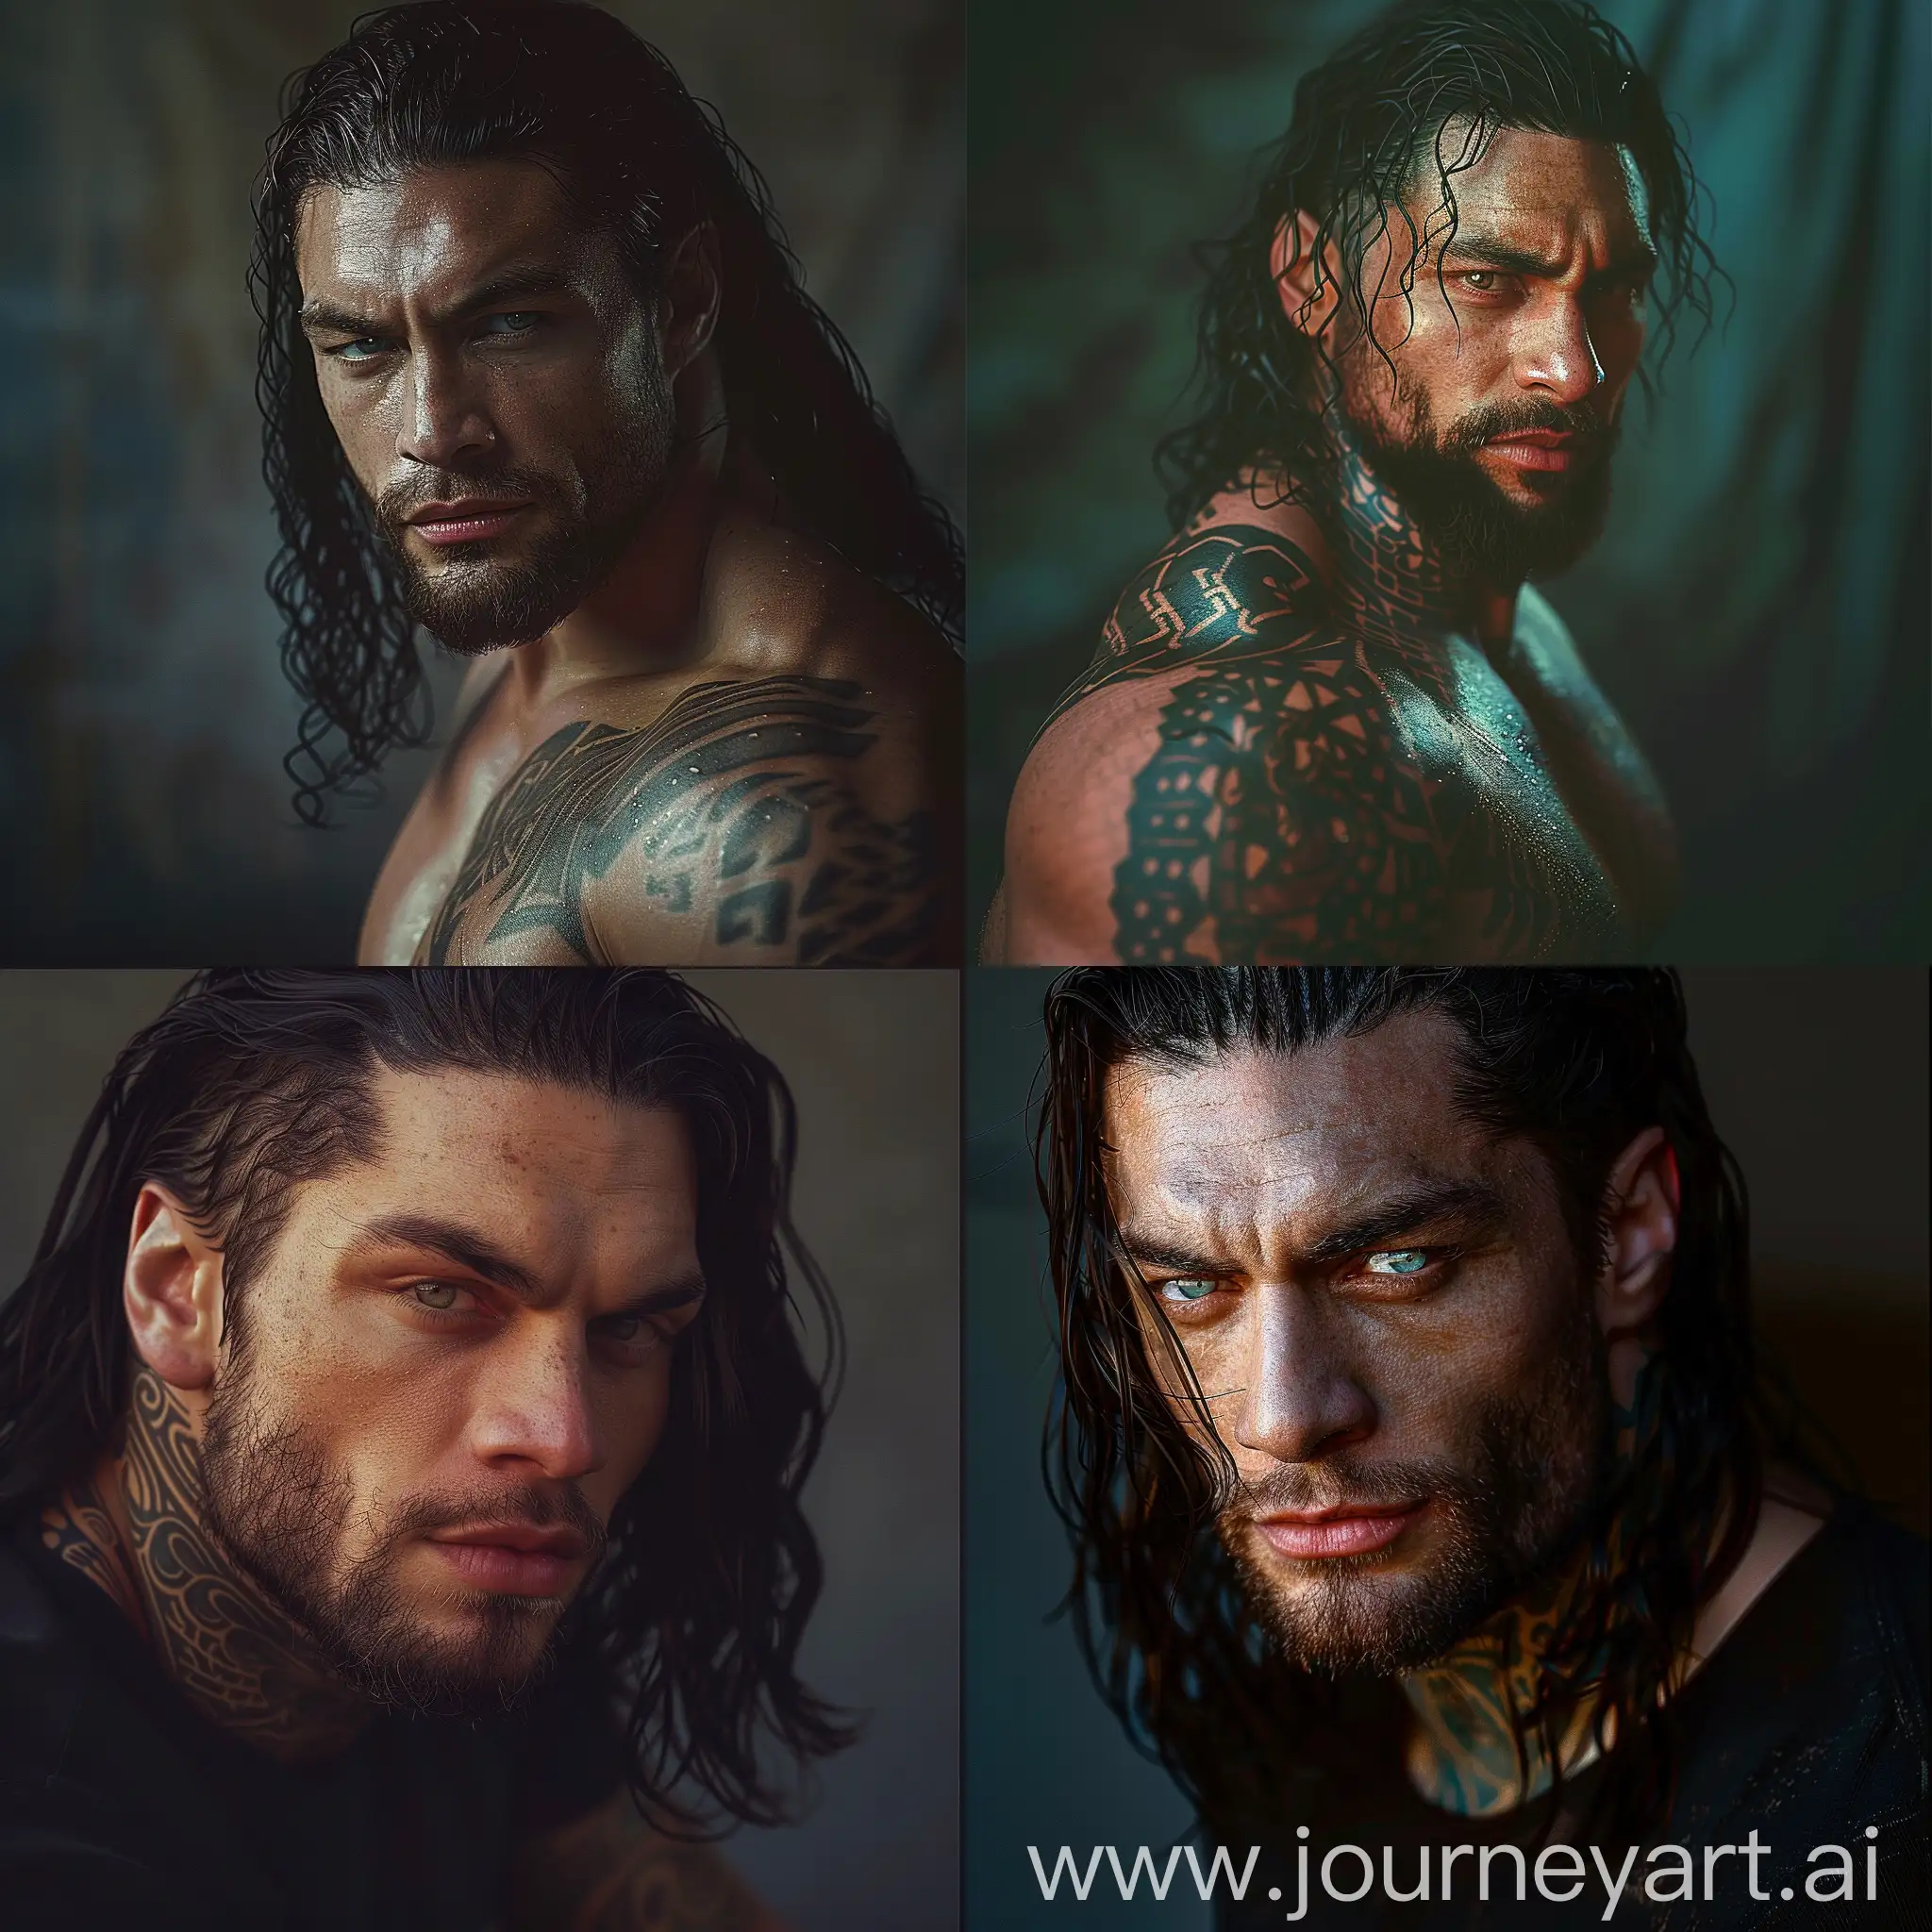 Subject: Roman Reigns, cinematic Photography in Petra Collins' Signature Style, with Zdzislaw Beksinski aesthetic
Type of Image: Photorealistic Image, 
Art Styles: cinematic Photography, 
Art Inspirations: Petra Collins
Camera: DSLR Camera 
Shot: Cinematic Shot 
Render Related Information: High Resolution, Soft Lighting, Dreamy Aesthetic, Expressive scene 
